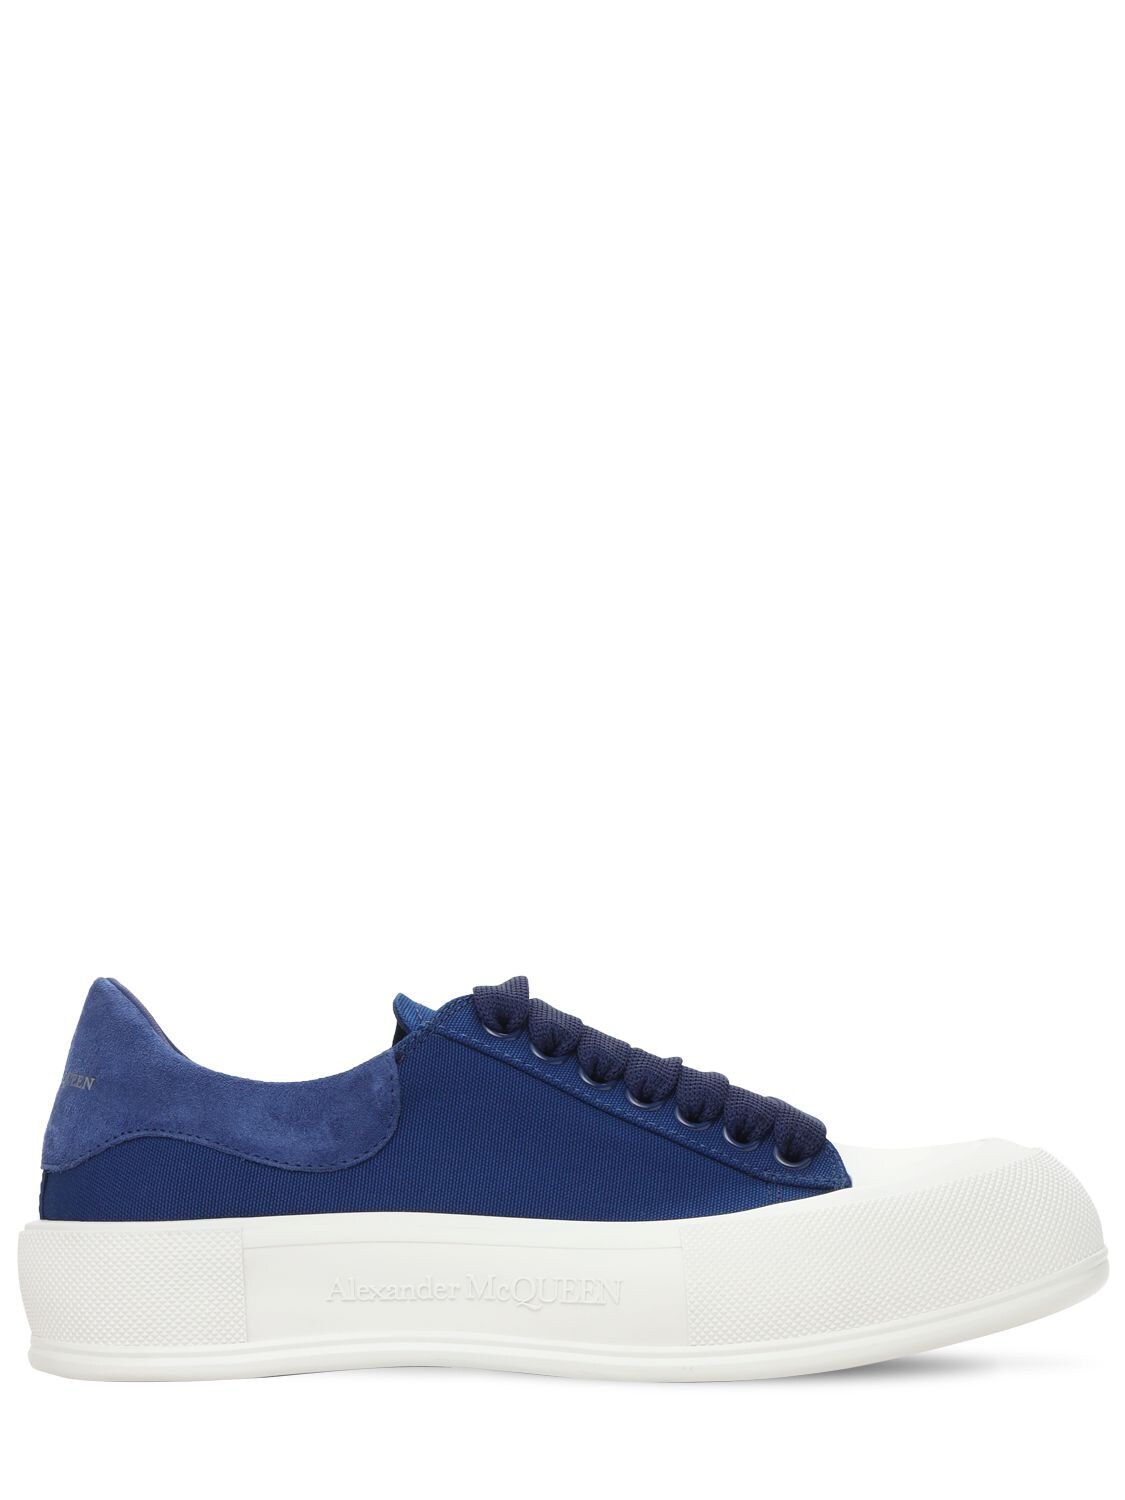 ALEXANDER MCQUEEN 45MM COTTON CANVAS & SUEDE SNEAKERS,73IA8F006-NDI4MG2